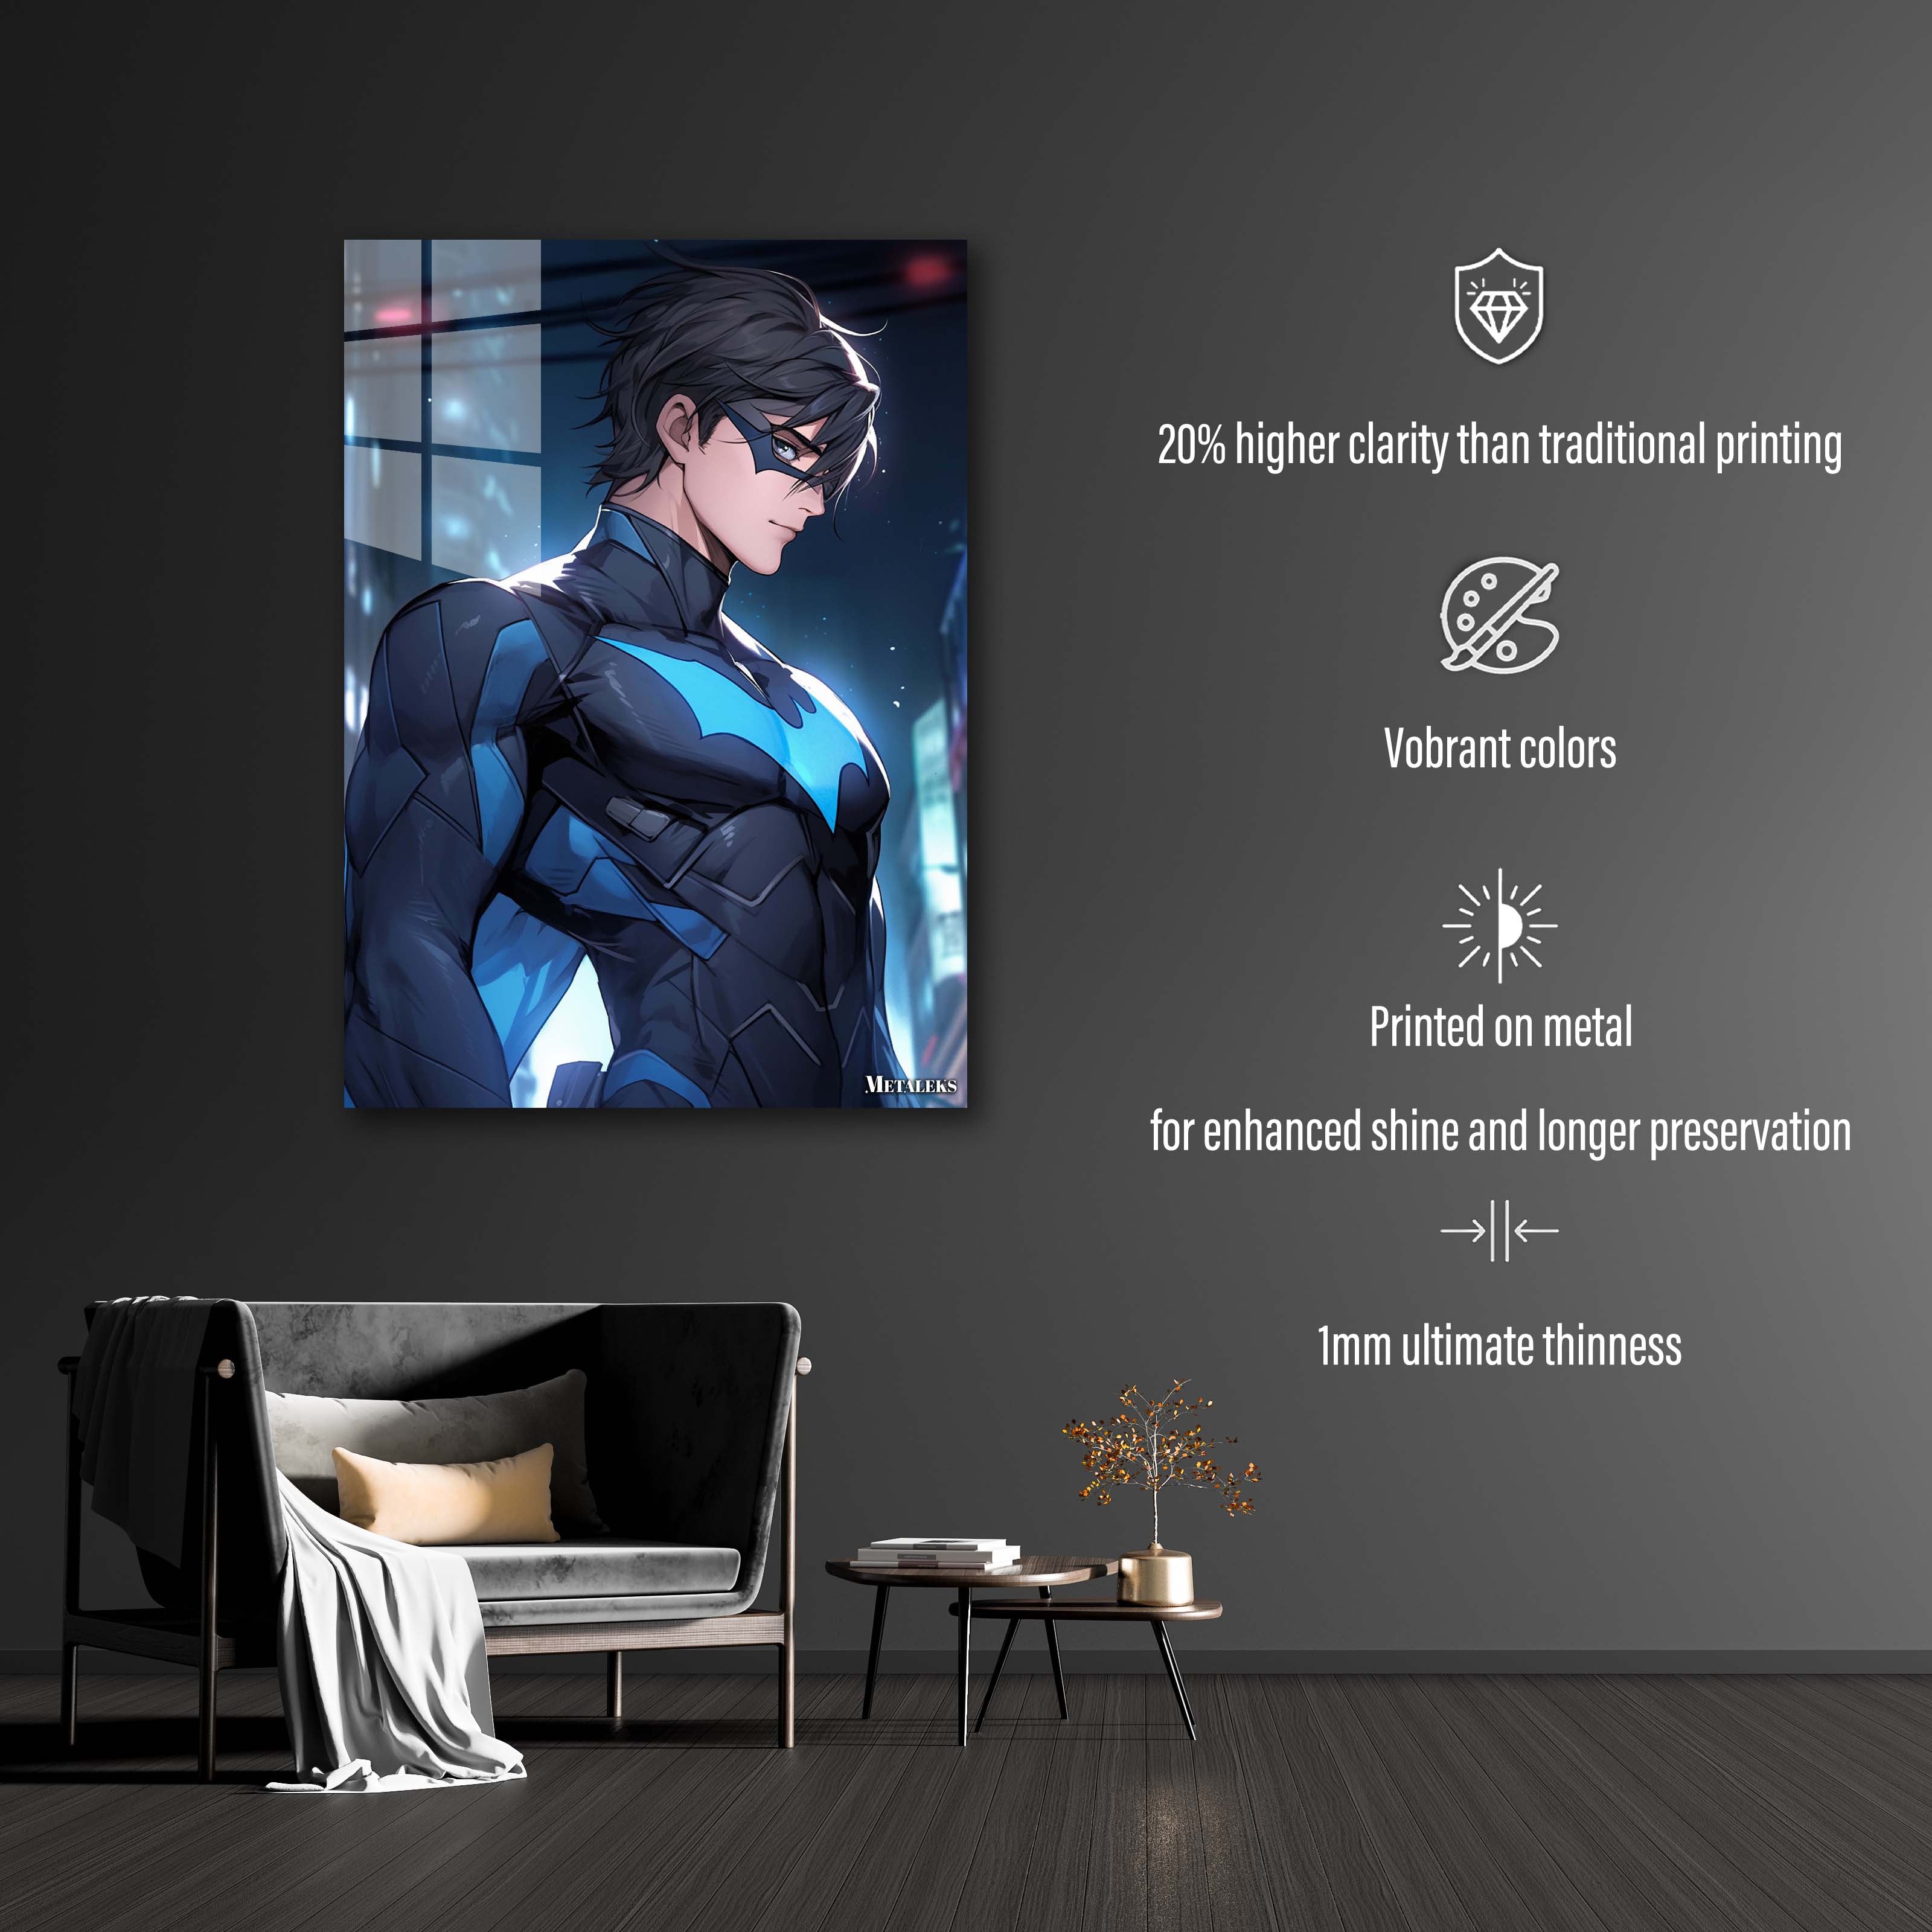 Gotham's Night Guardian_ Nightwing's Urban Chronicles-designed by @theanimecrossover